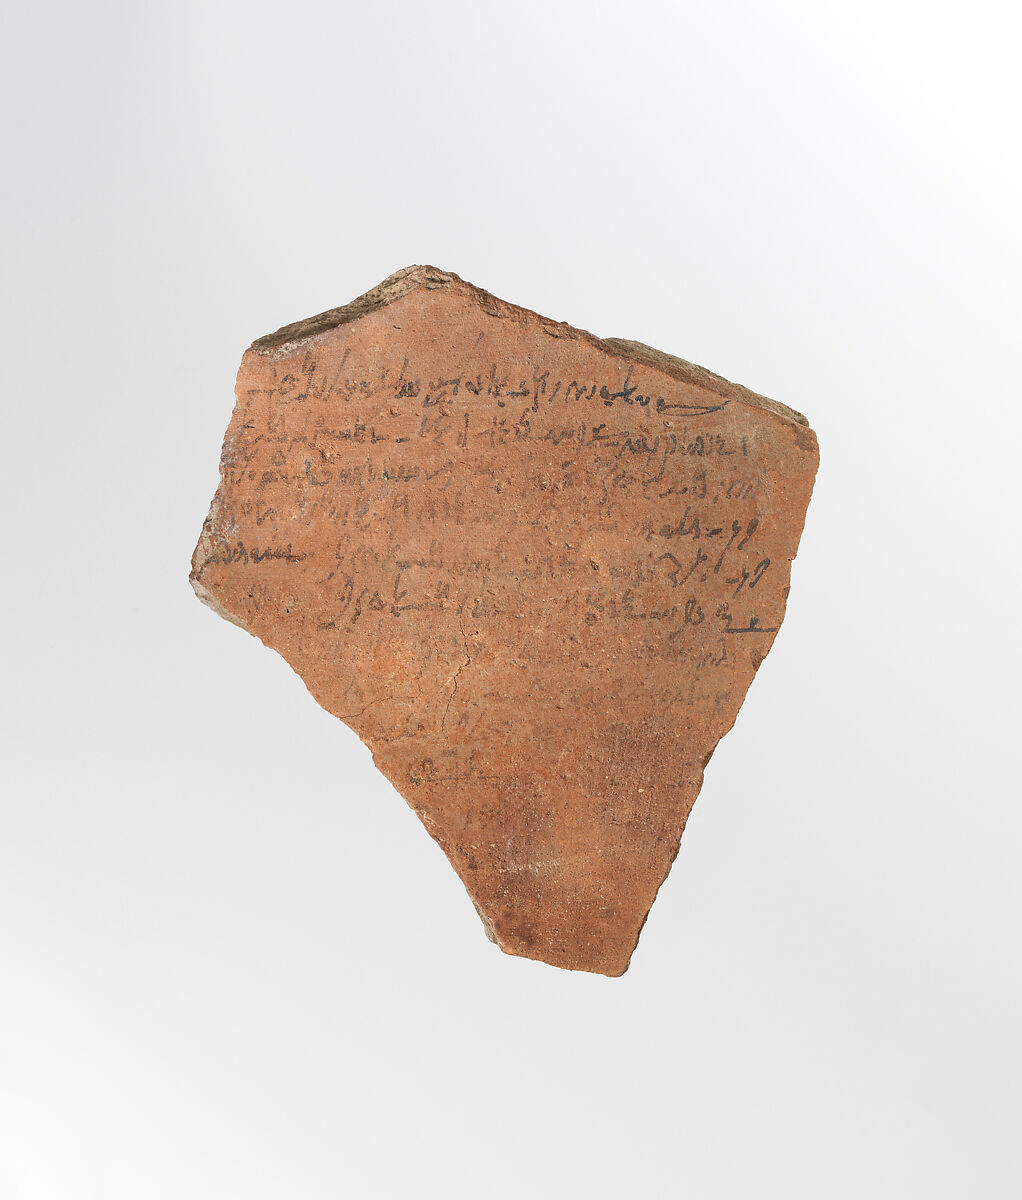 Ostracon, Pottery, ink 